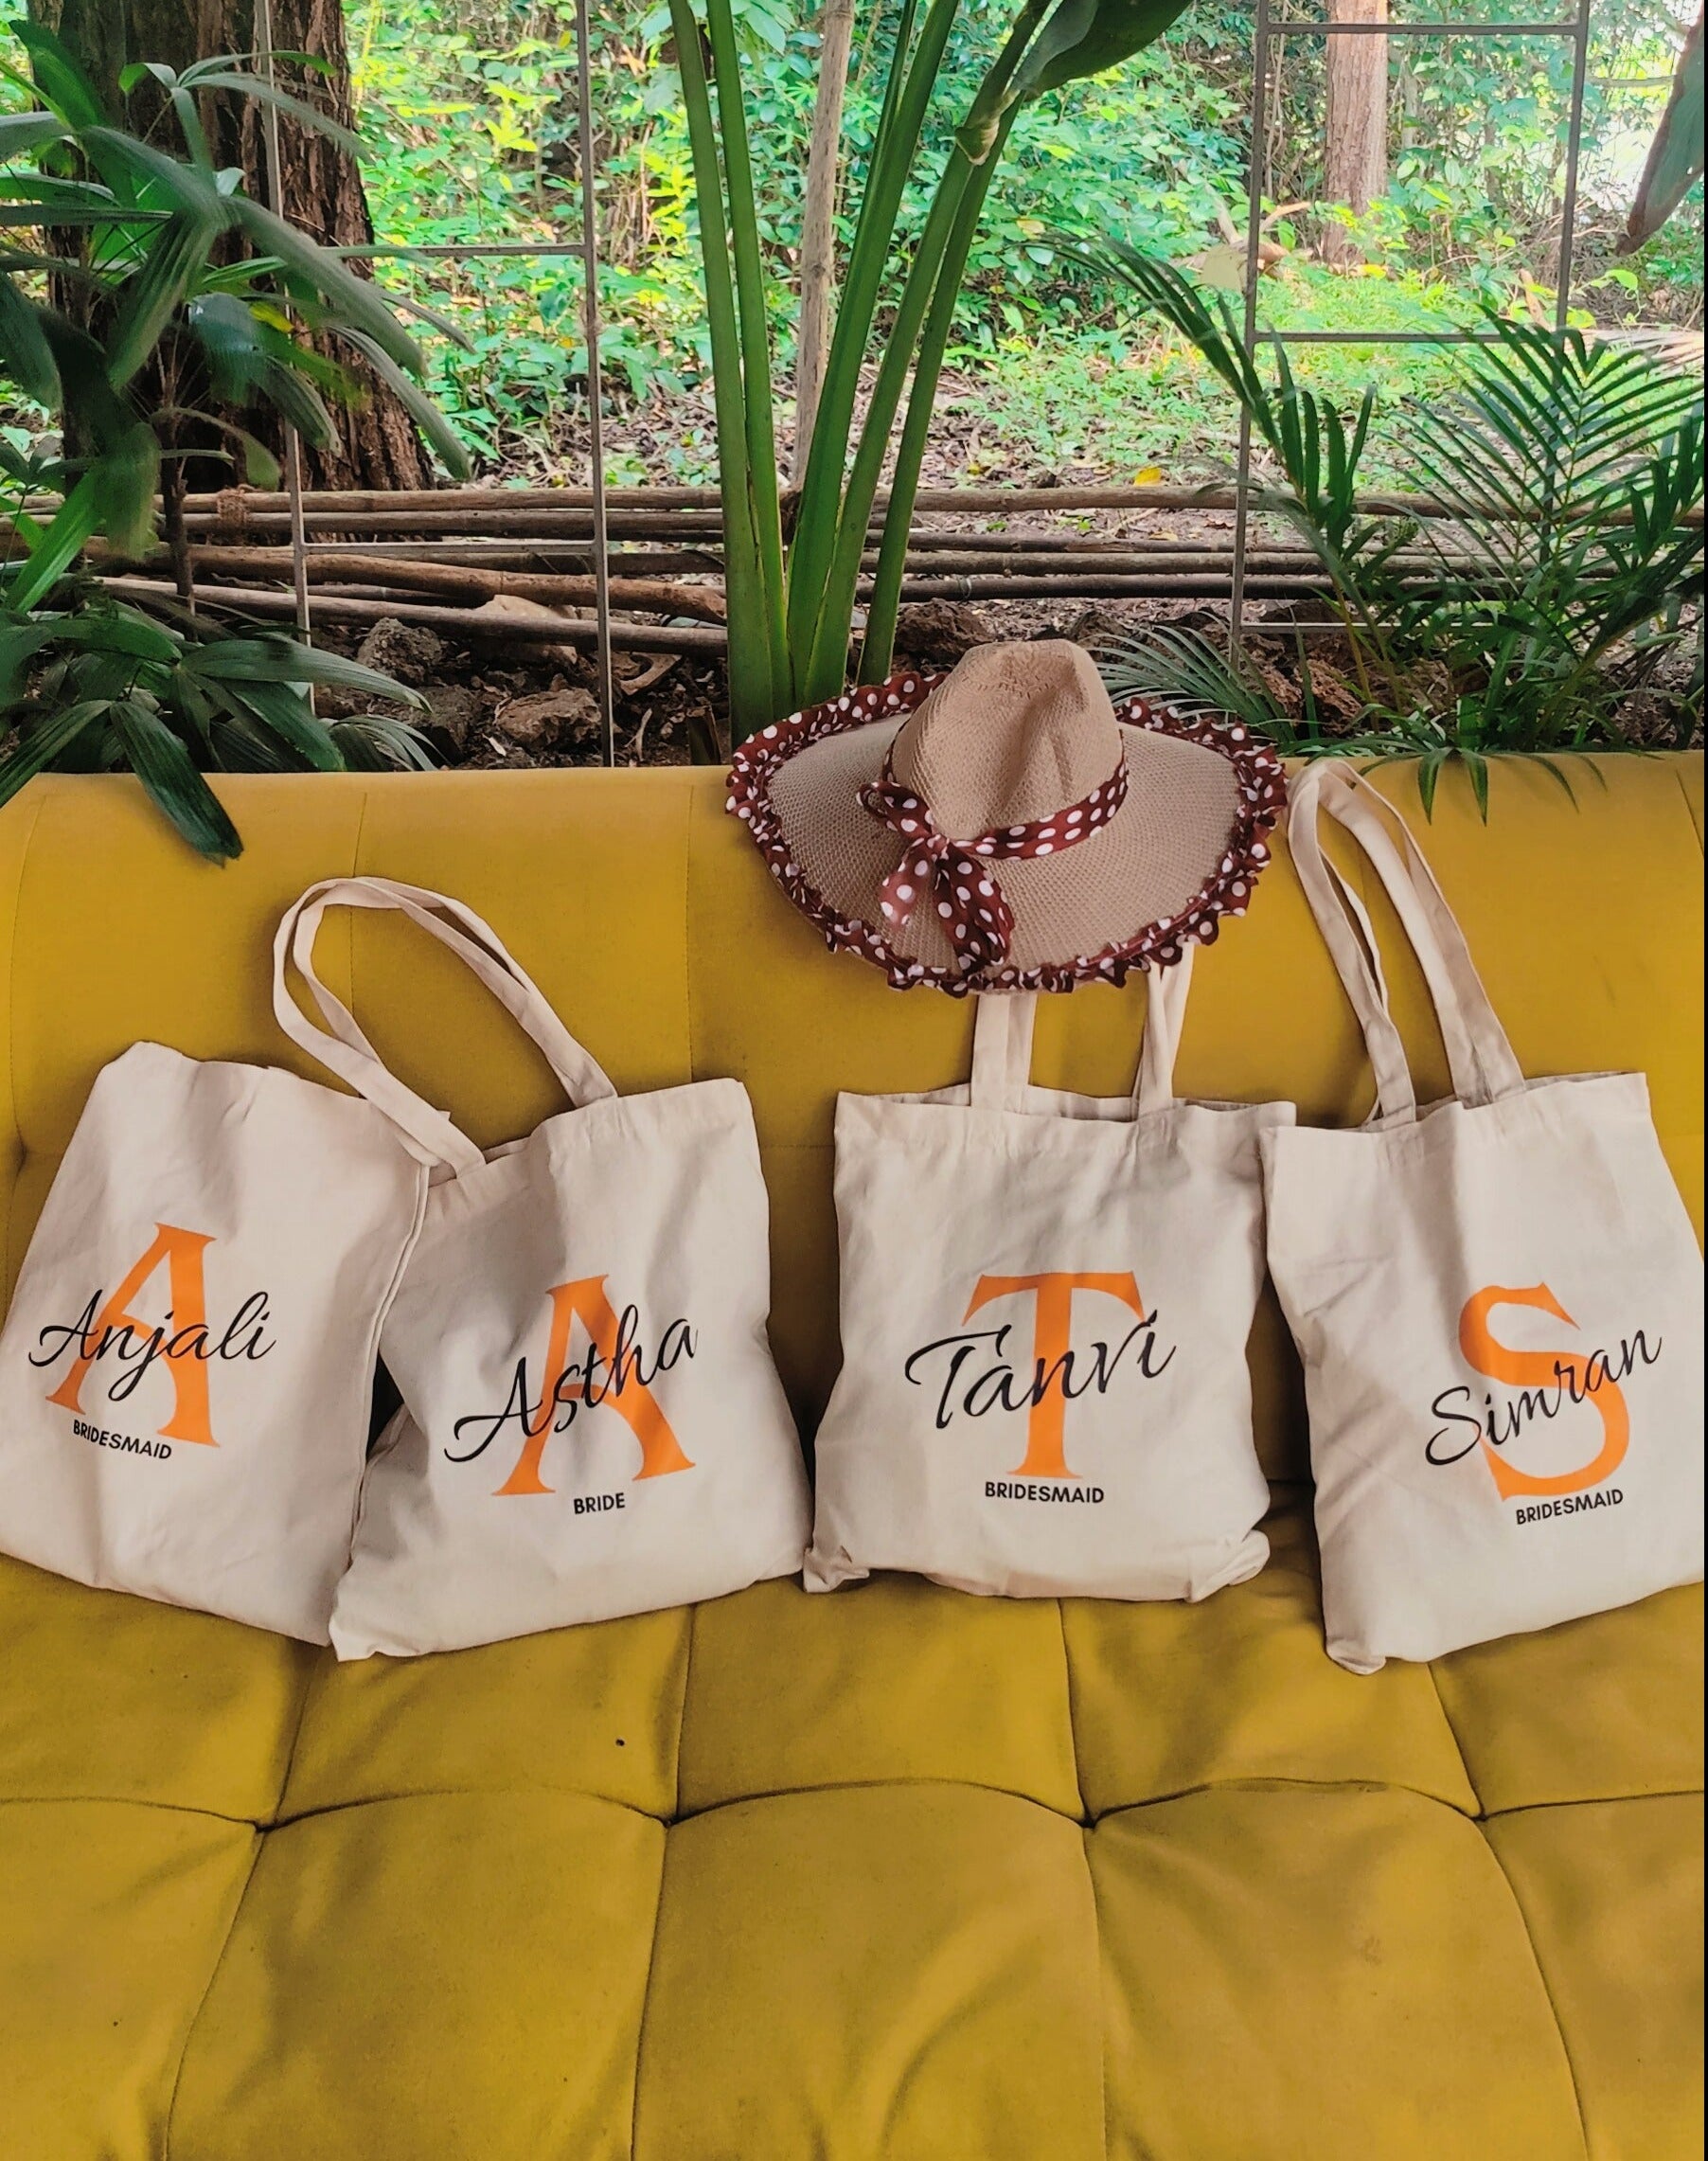 Anjali Swami Tote Bags for Sale